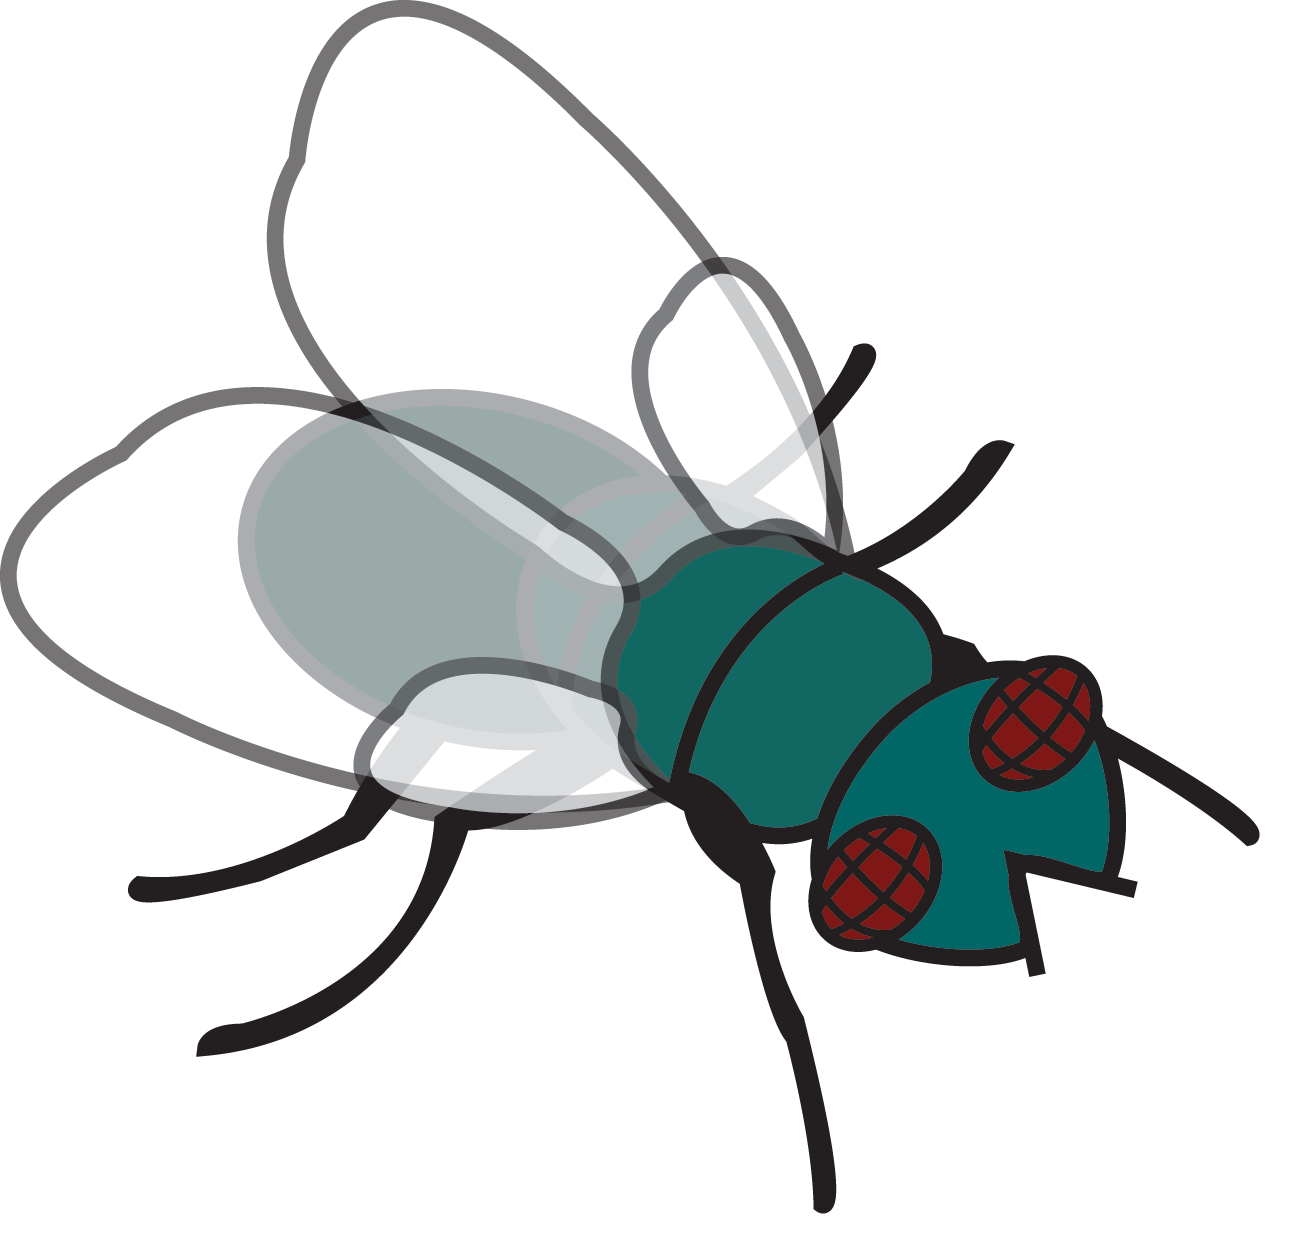 clipart of a fly - photo #8